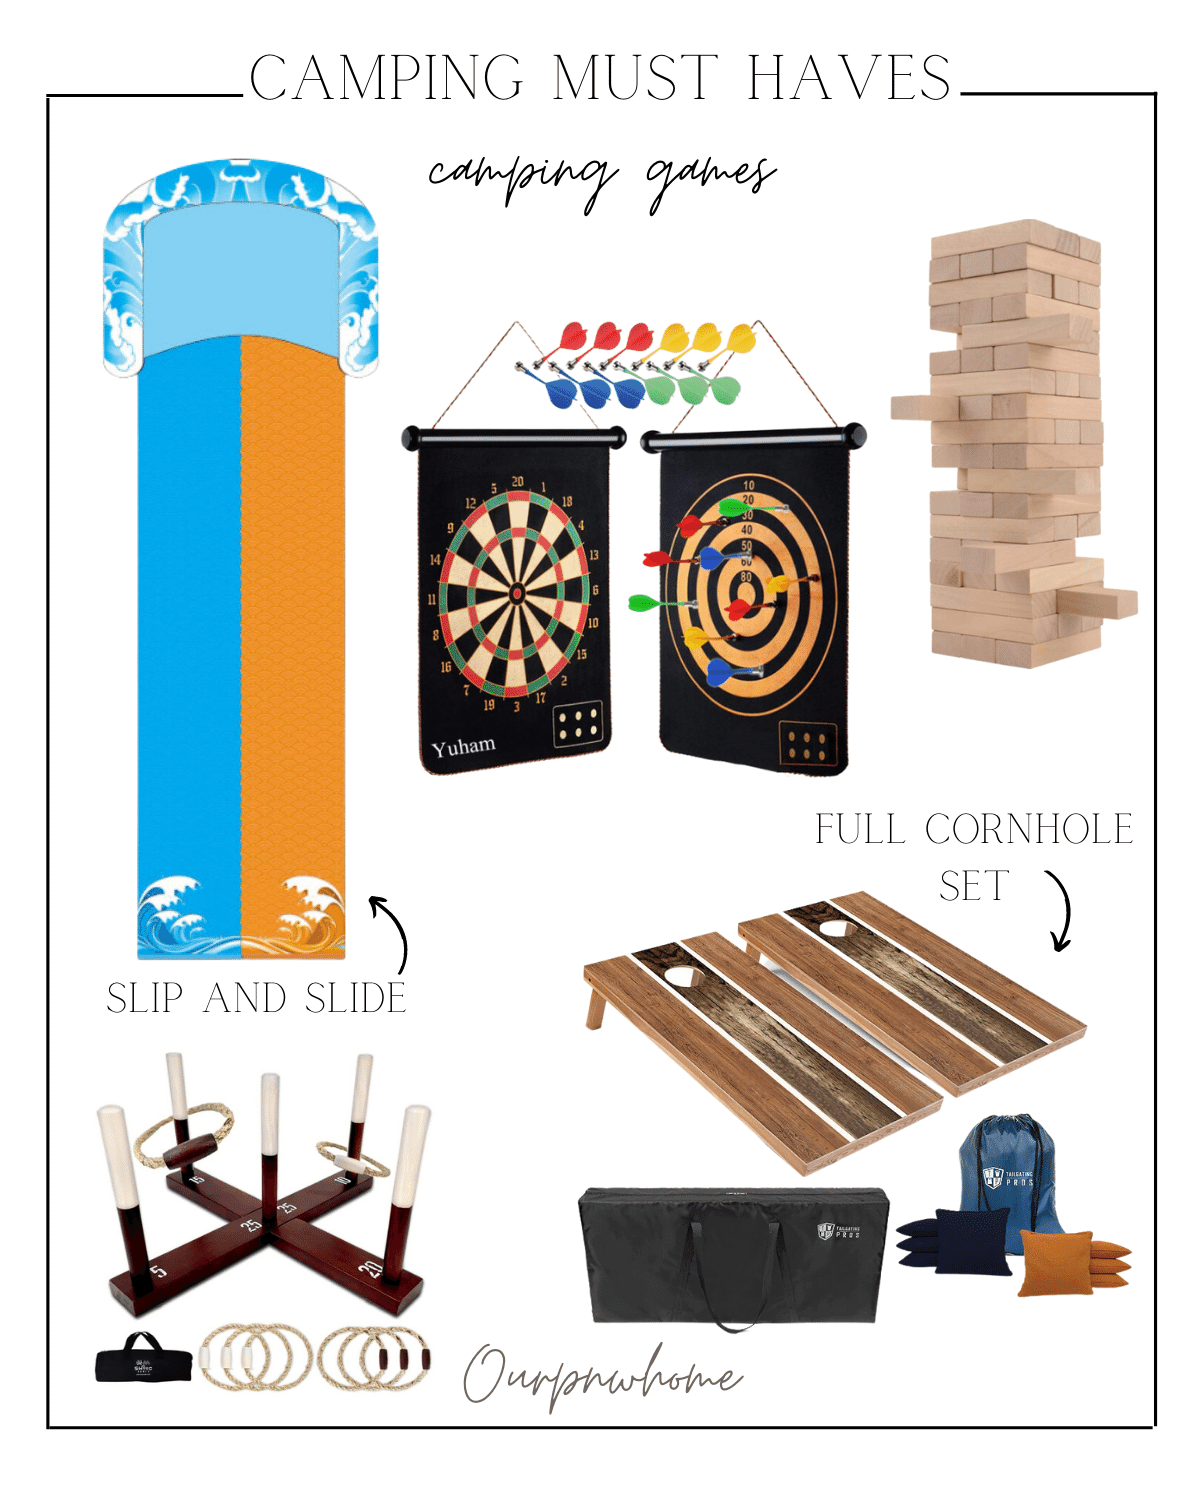 camper games, camping must haves, camping games, games for kids, games for adults, jenga, darts, slip and slide, cornhole, ring toss 